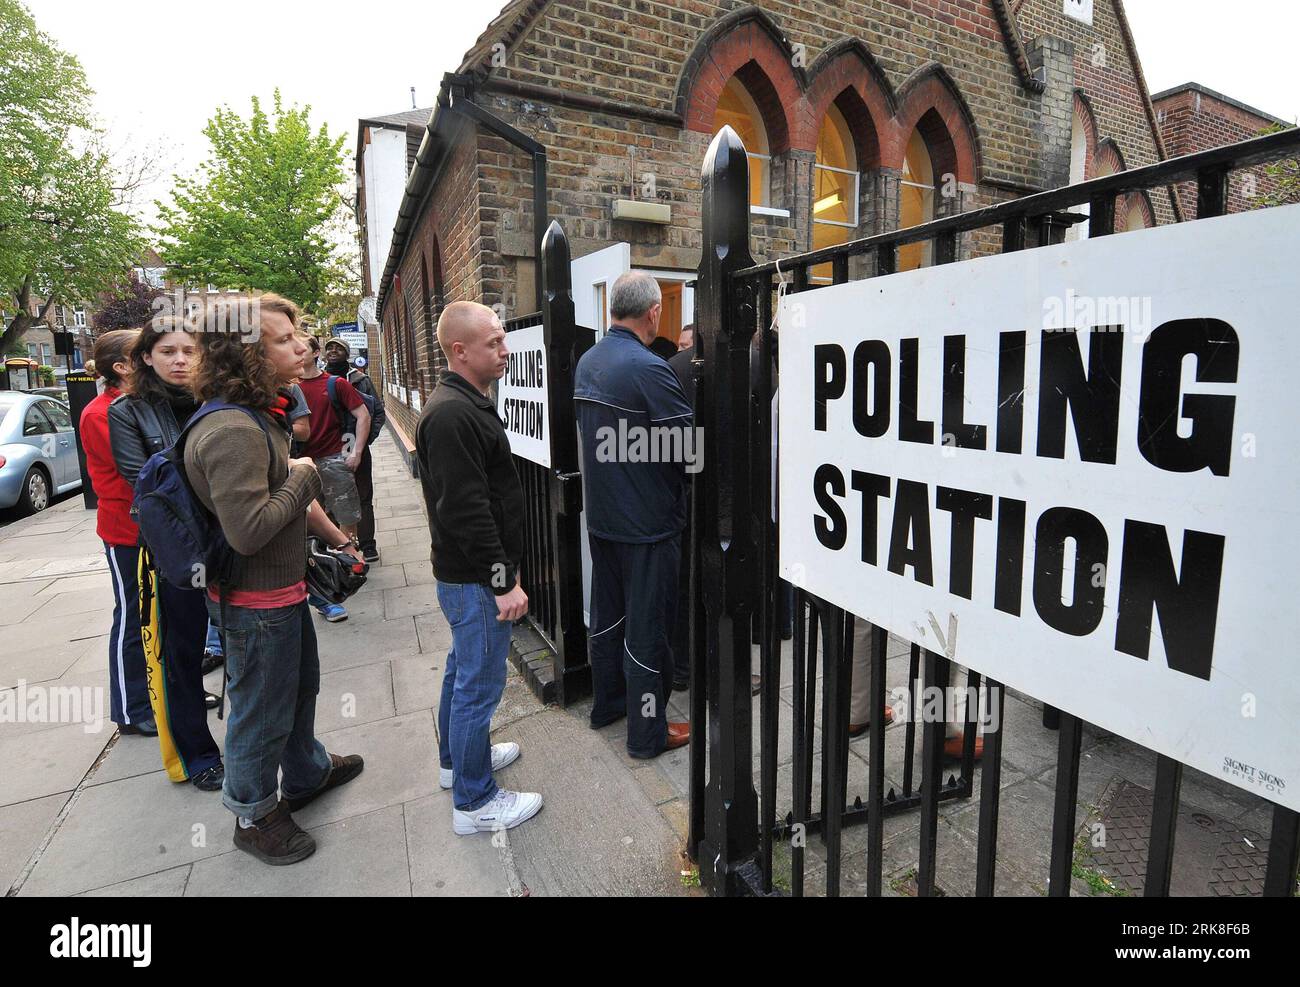 Bildnummer: 54030341  Datum: 06.05.2010  Copyright: imago/Xinhua (100506) -- LONDON, May 6, 2010 (Xinhua) -- Voters wait to cast their ballots at a polling station in London, Britain, May 6, 2010. The turnout for the most eagerly anticipated general election for nearly 40 years in Britain was expected to be up on the last general election s figure of 61 percent, and some commentators believe it could be as high as 70 percent, (Xinhua/Wu Wei) (zw) (4)BRITAIN-LONDON-GENERAL ELECTION-TURNOUT PUBLICATIONxNOTxINxCHN Gesellschaft Politik Wahl Wahlen England Wahllokal kbdig xdp premiumd xint 2010 que Stock Photo